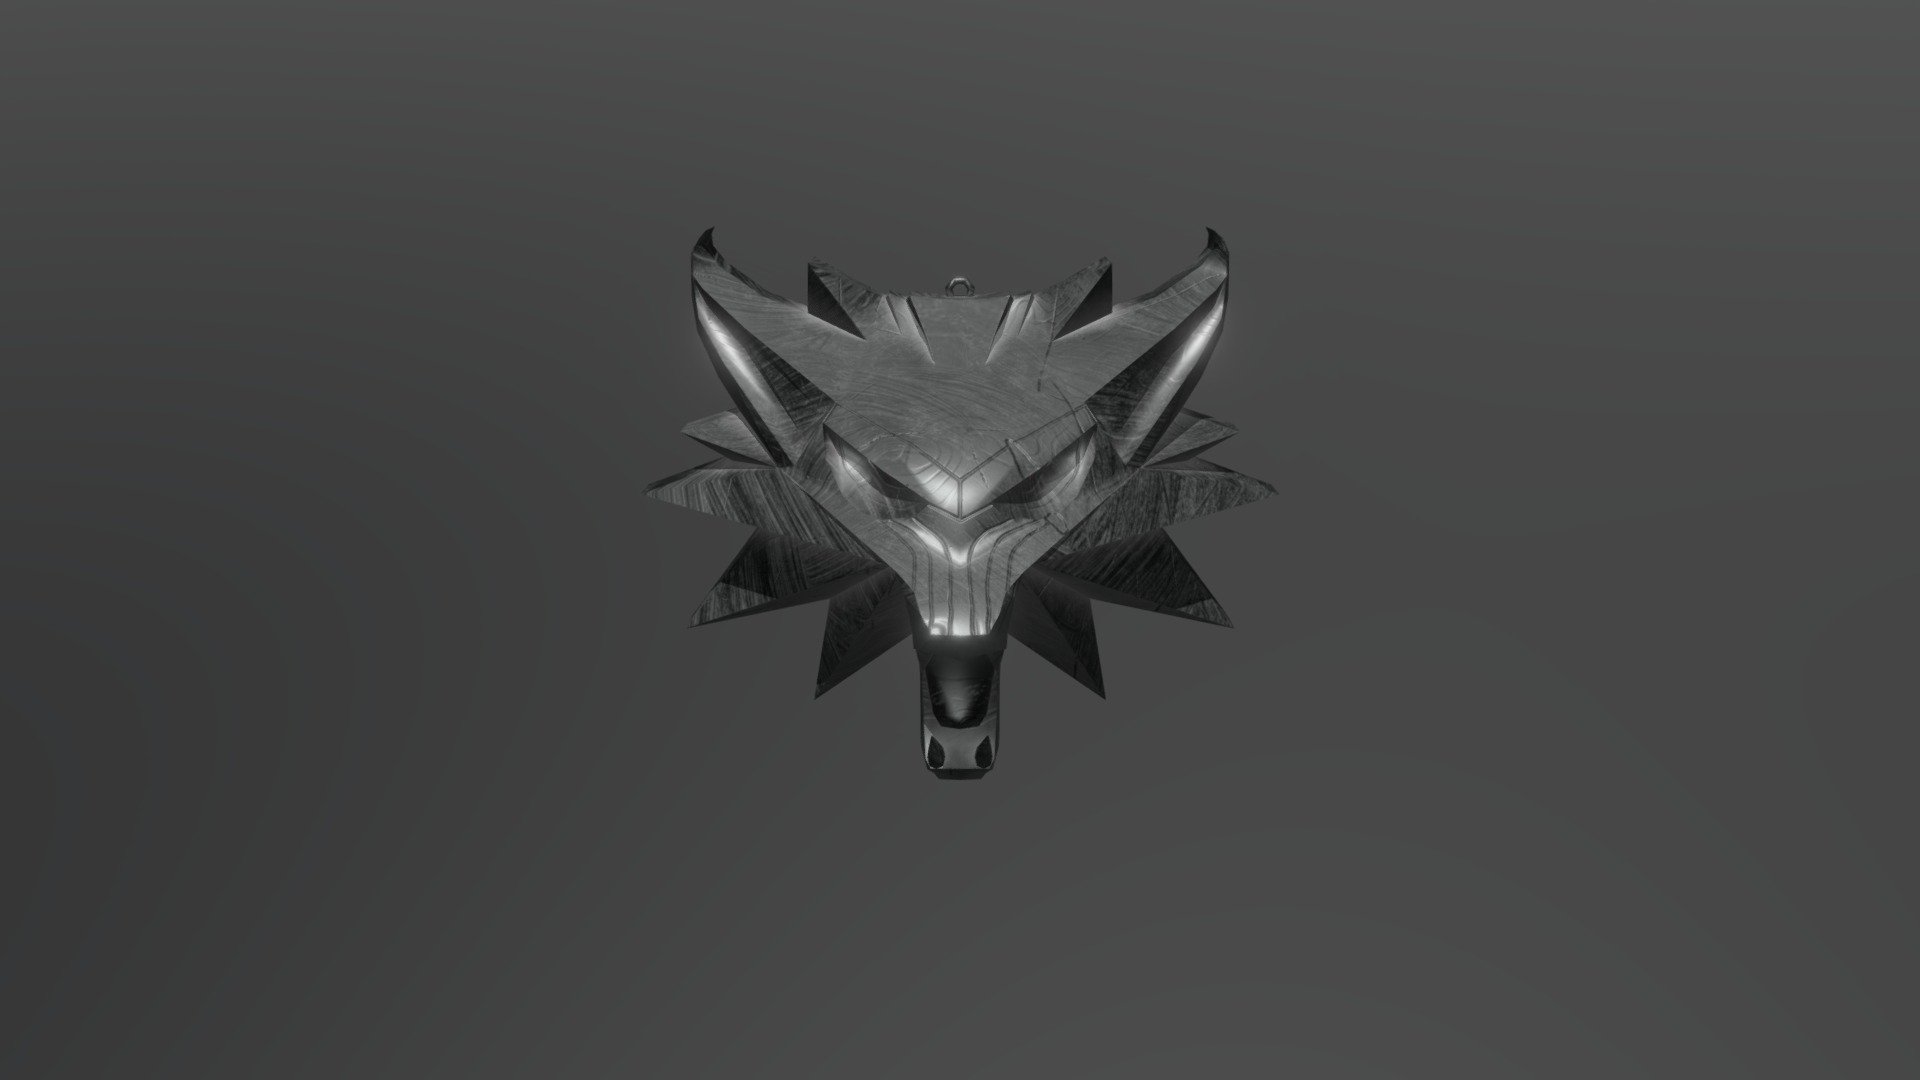 The witcher 3 medallion